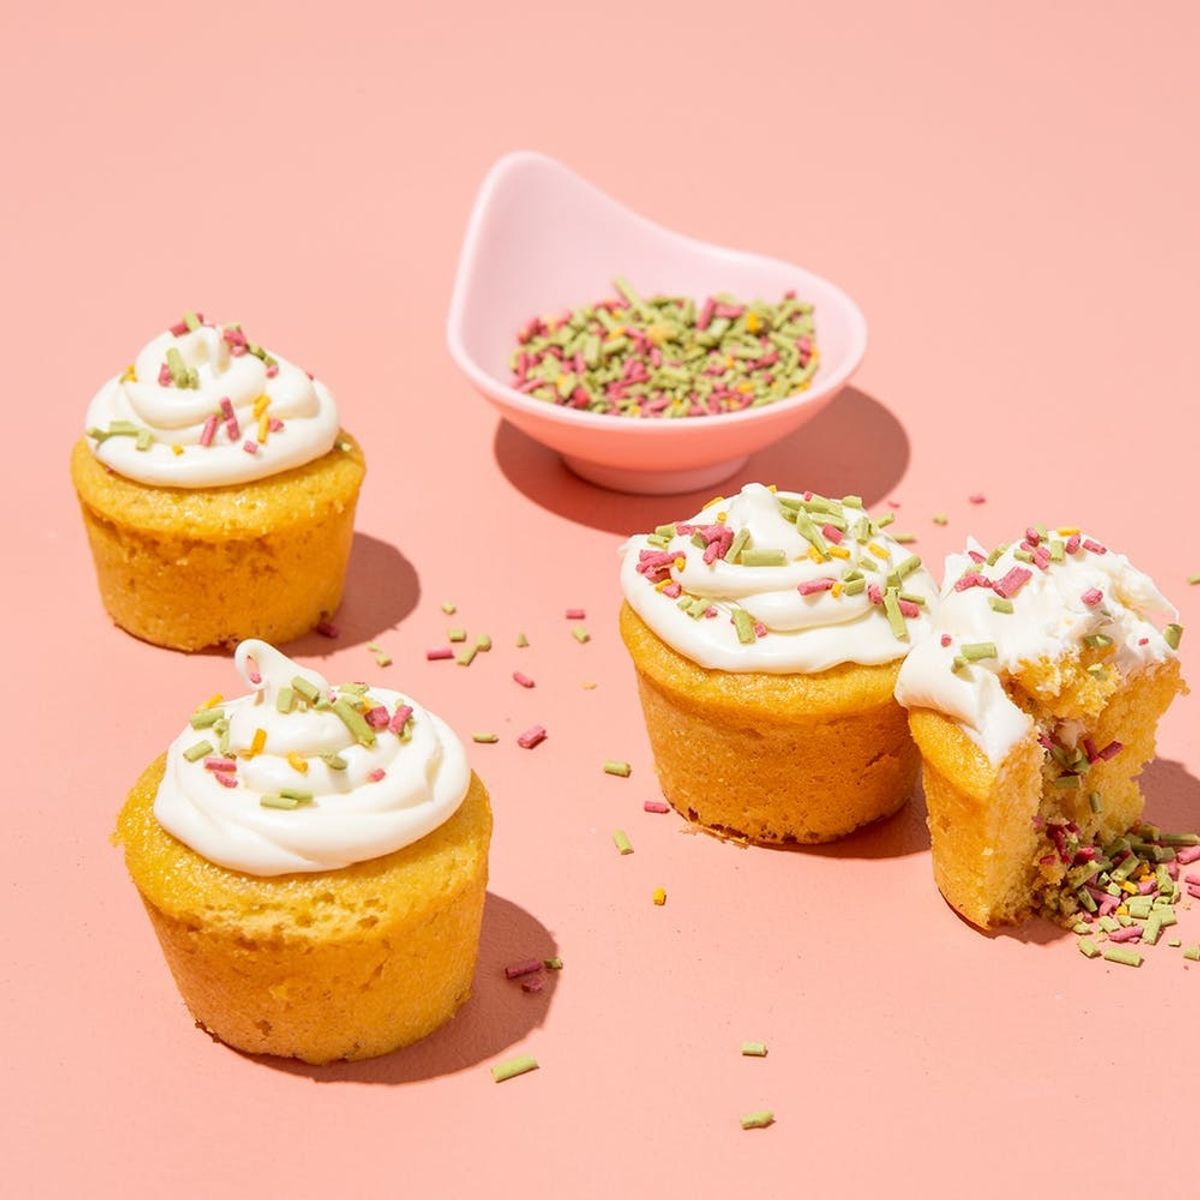 Natural-Dye, Sugar-Free Sprinkles Are the Ultimate, Guilt-Free Topping